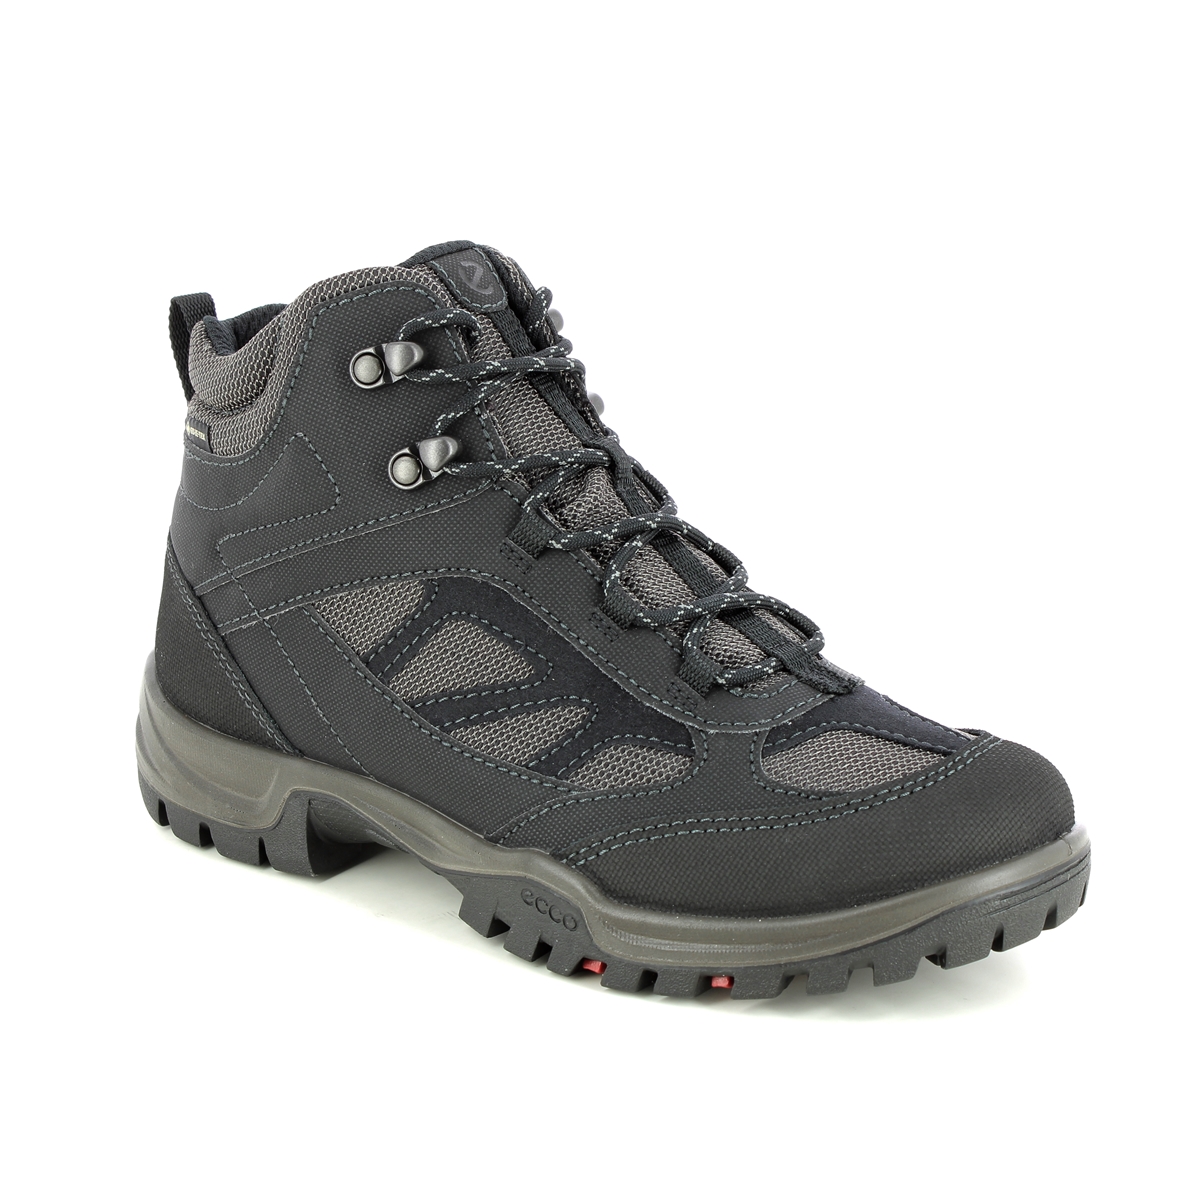 Ecco Xpedition W Mid Gtx Black Womens Walking Boots 811273-51526 In Size 36 In Plain Black